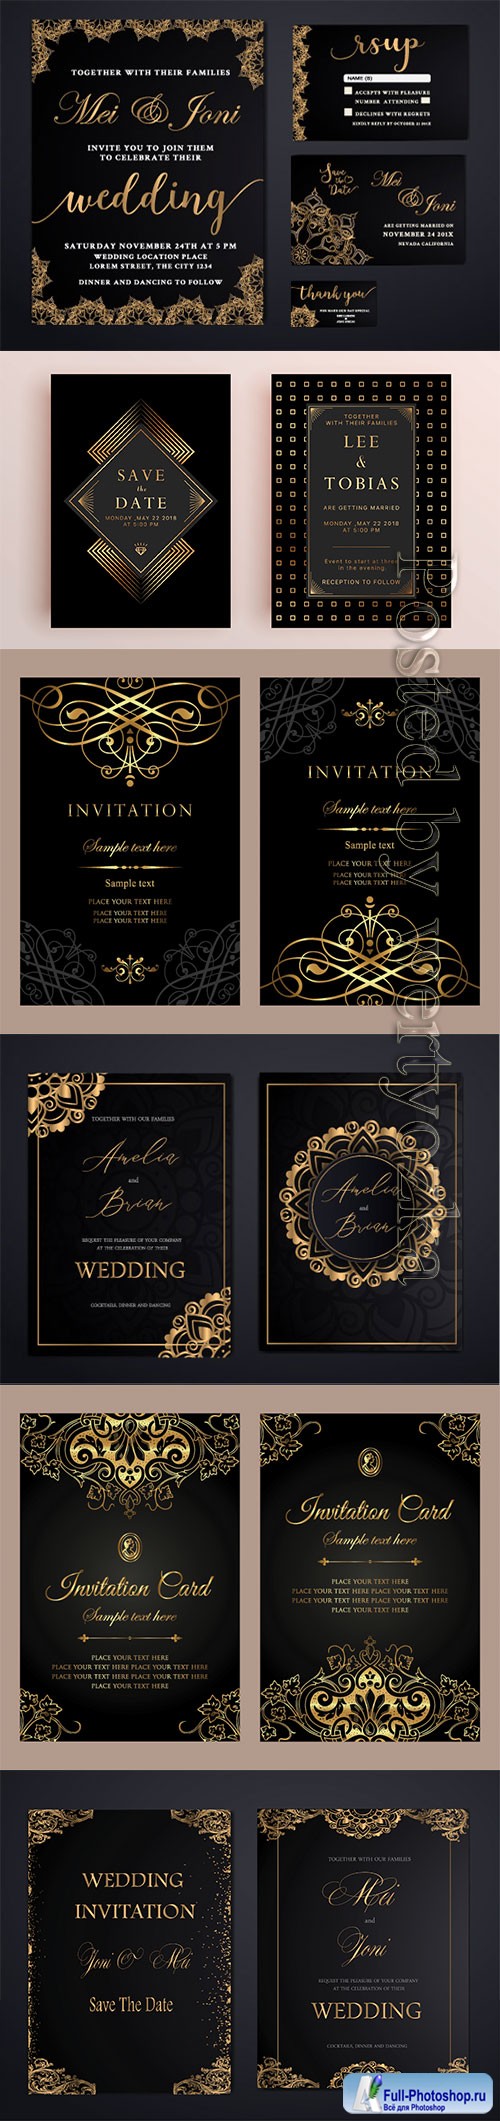 Invitation card luxury gold template design in vintage style